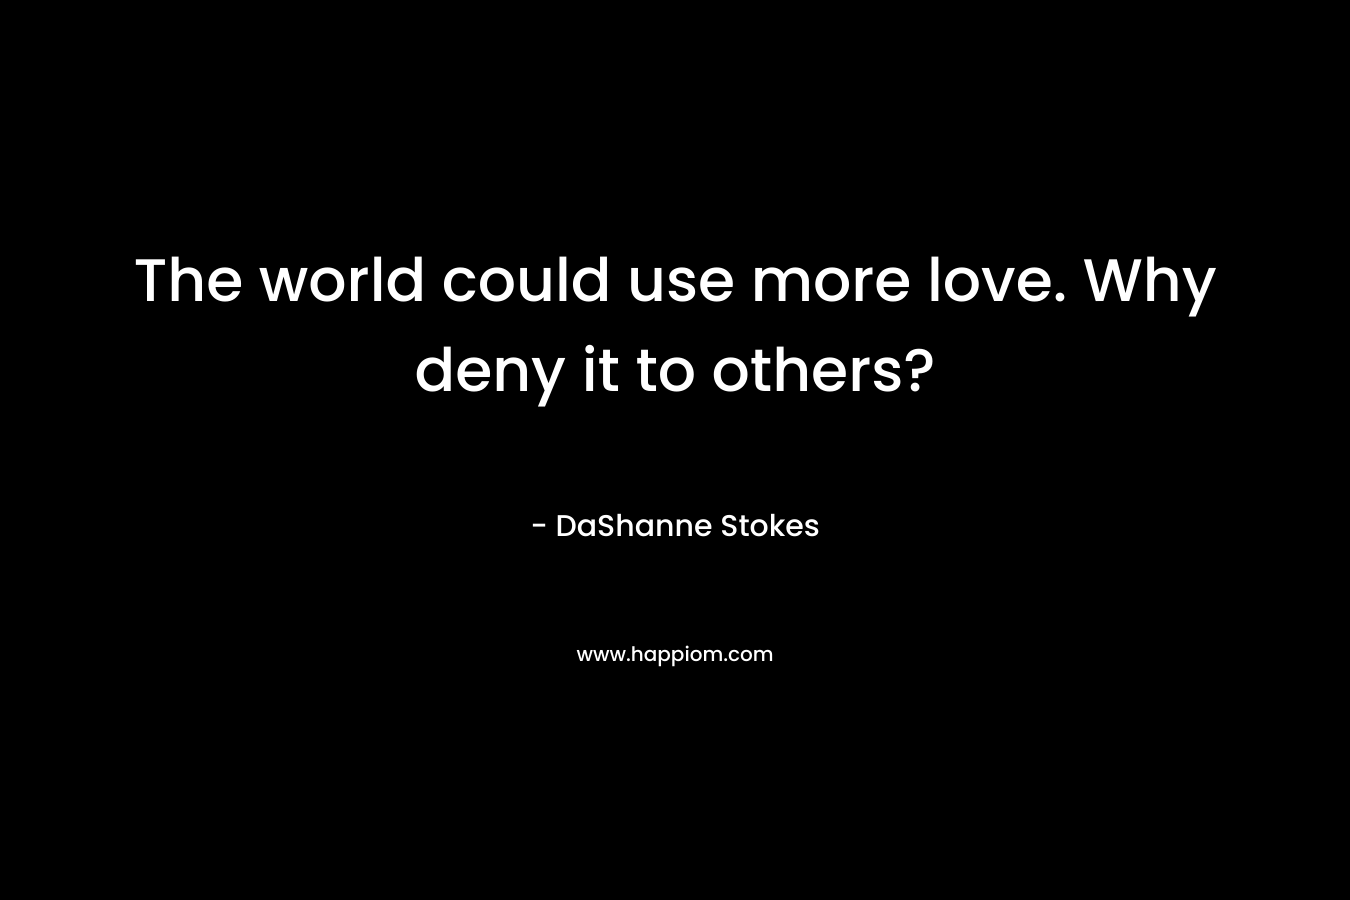 The world could use more love. Why deny it to others?